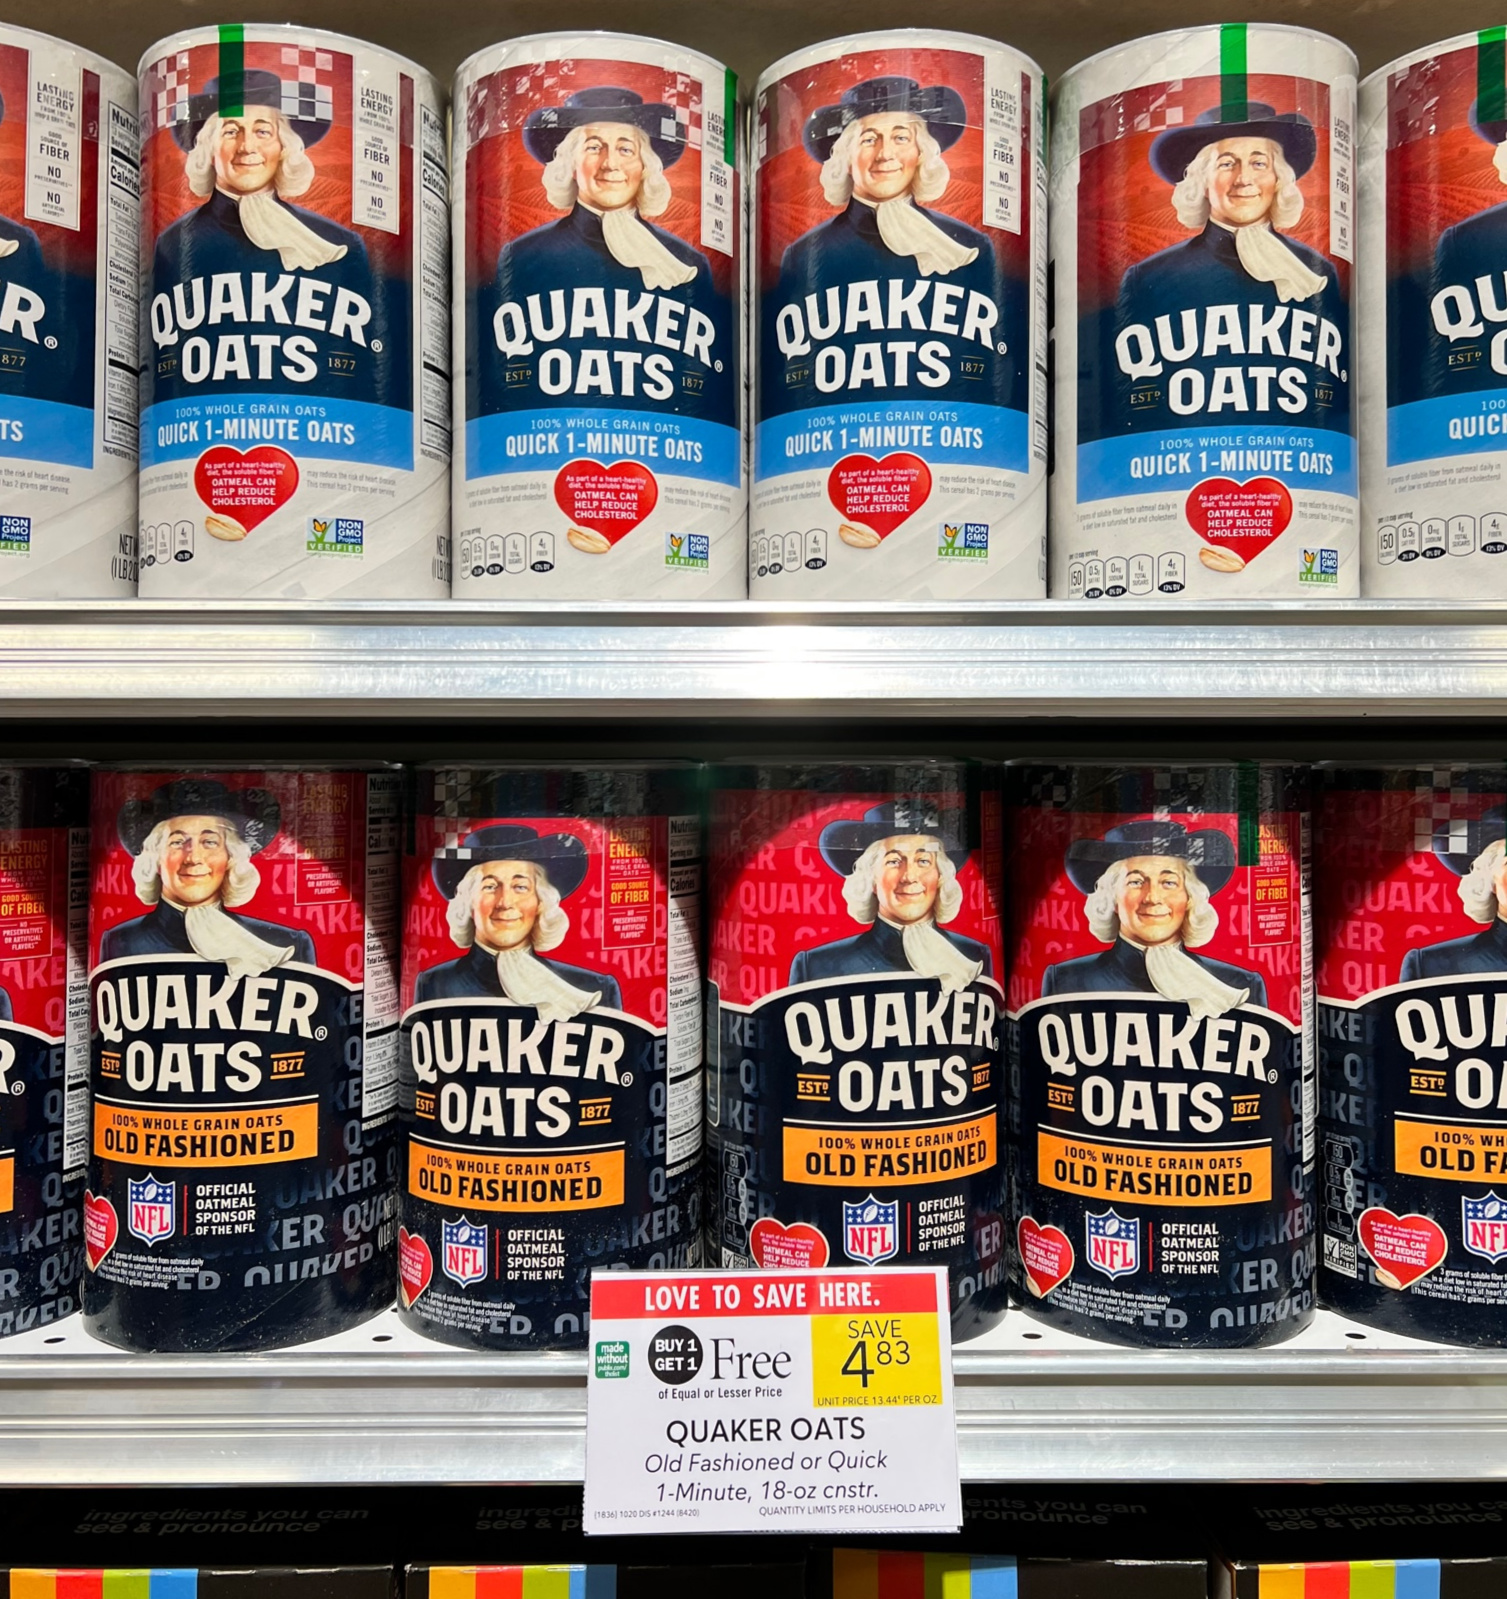 Quaker Oats As Low As 17¢ For A Canister At Publix - iHeartPublix